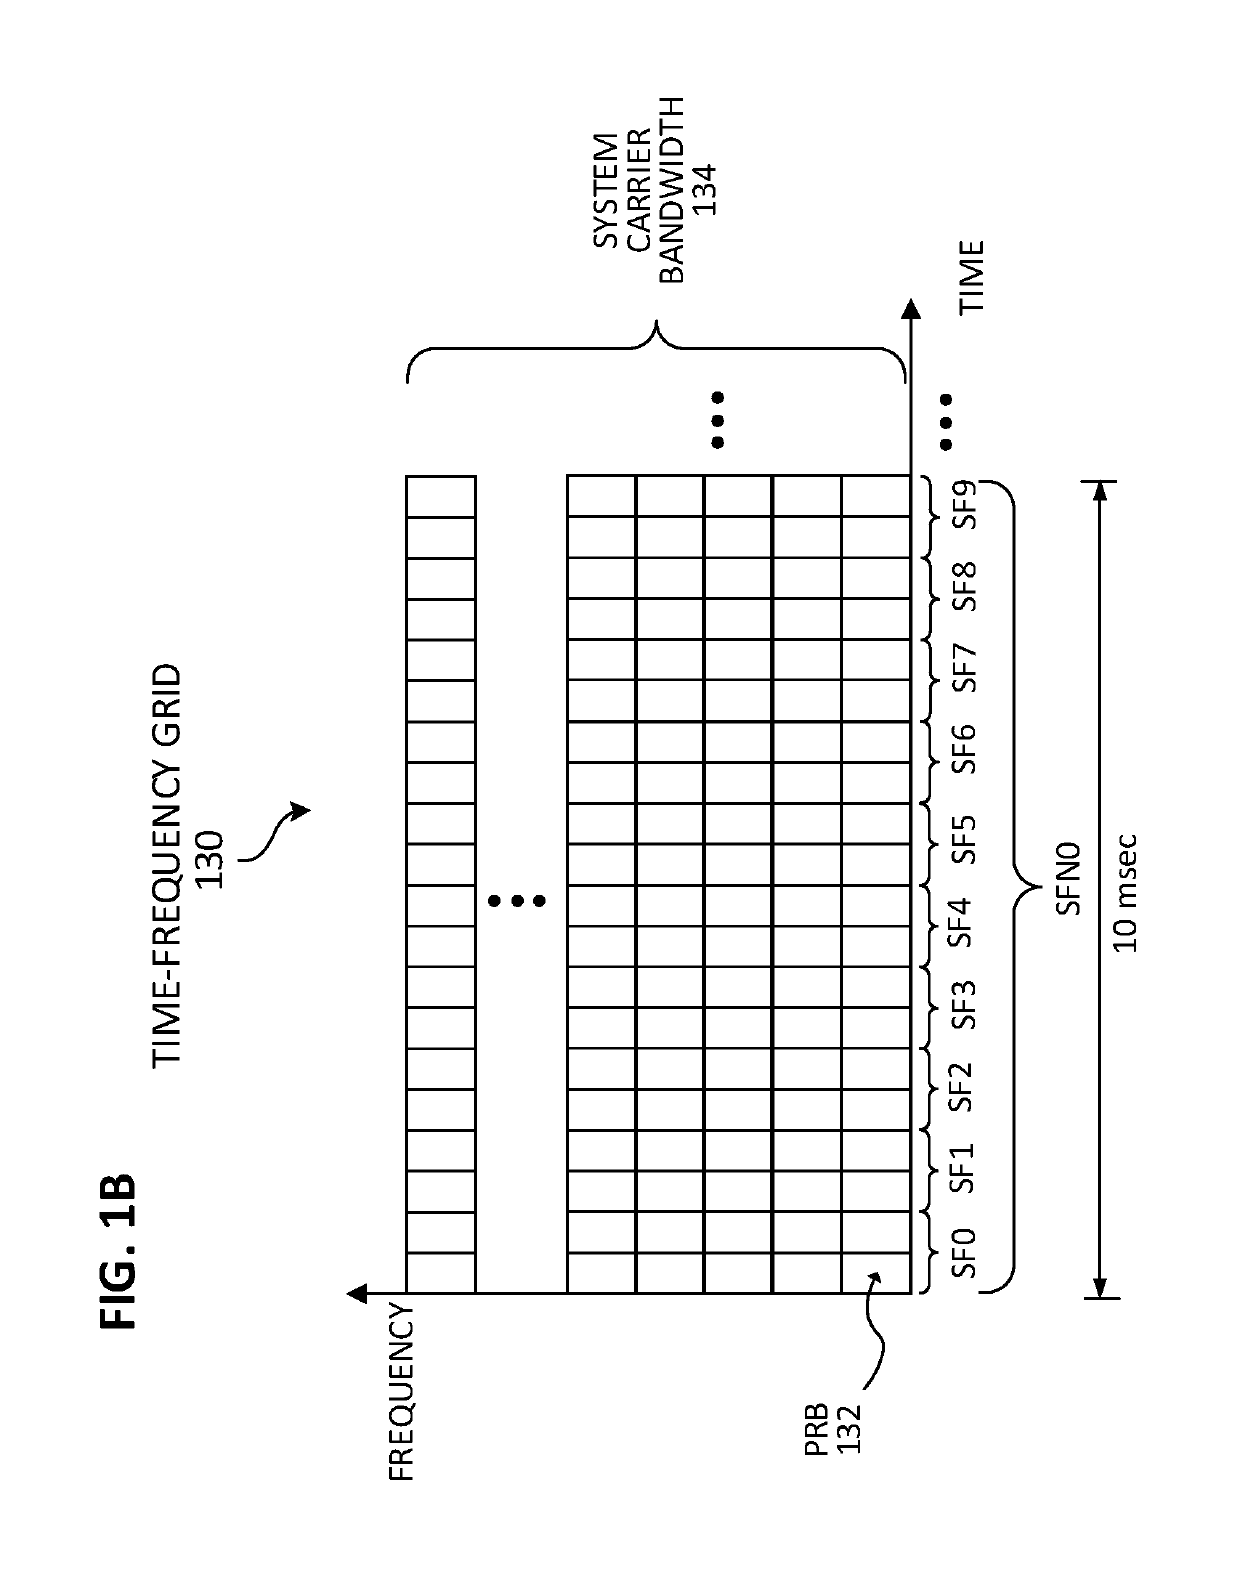 System and method to facilitate power domain interference coordination in a network environment